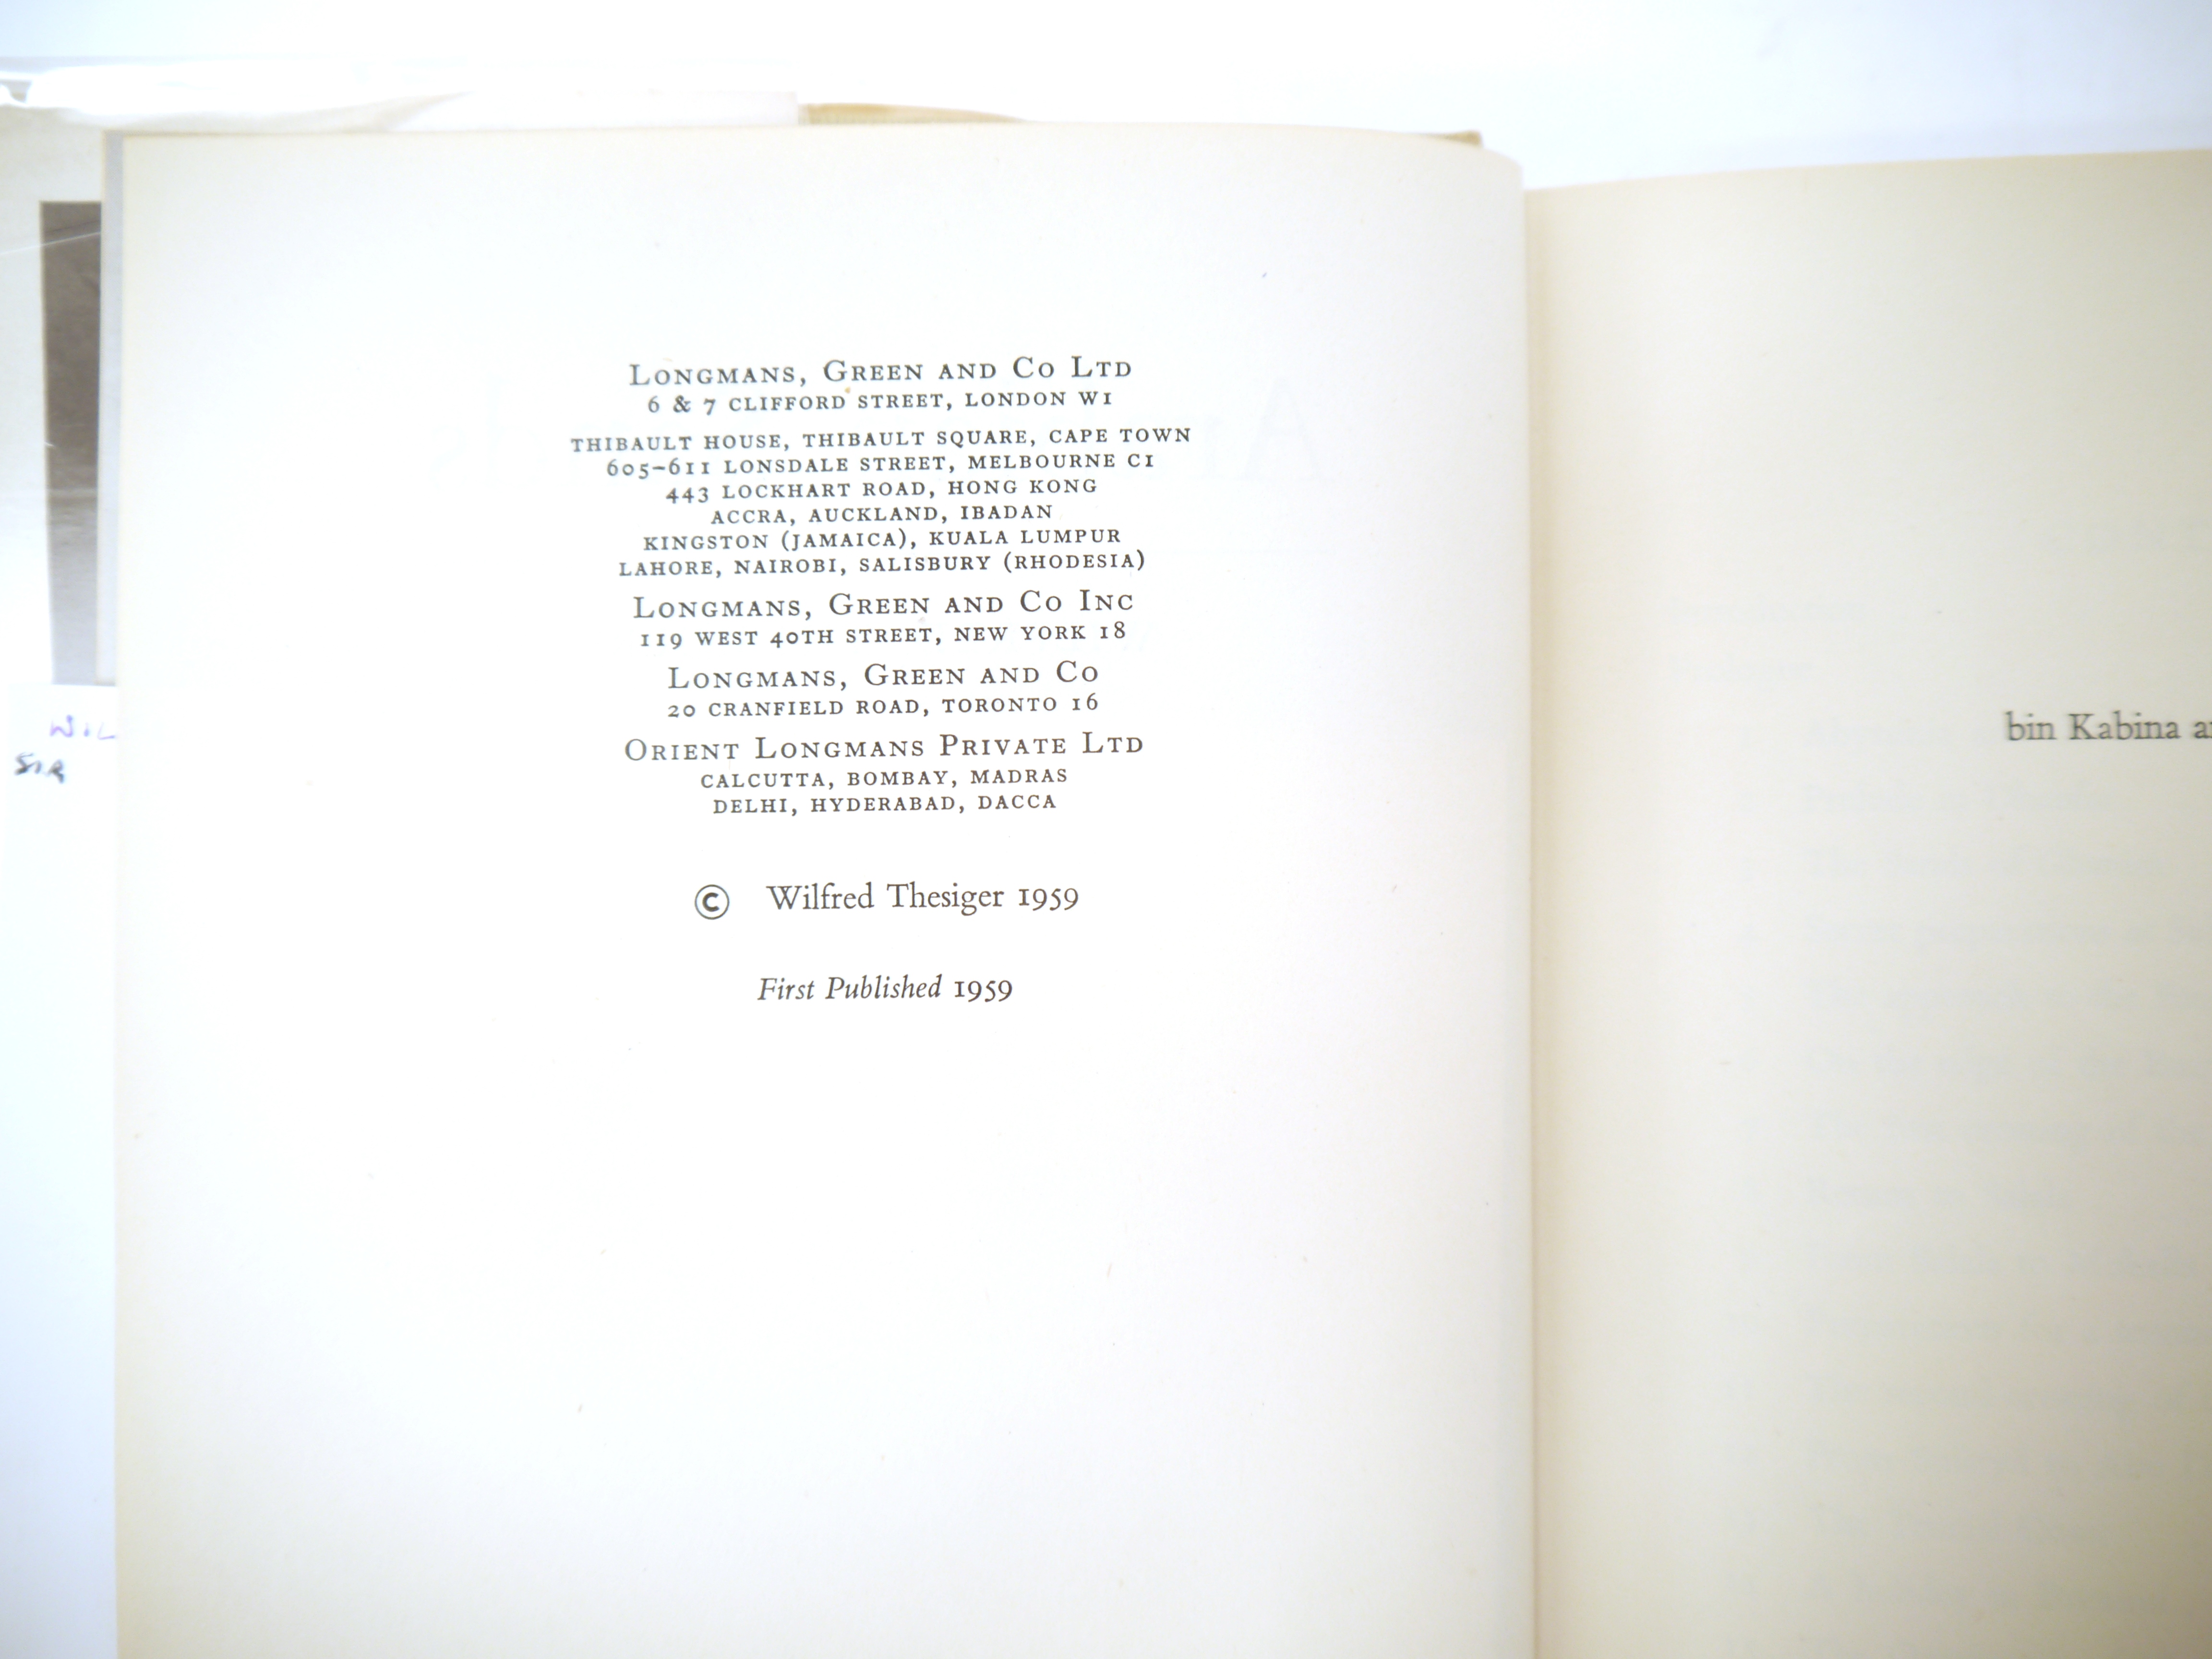 Wilfred Thesiger: 'Arabian Sands', London, Longmans, 1959, 1st edition, card signed by Thesiger in - Image 3 of 7